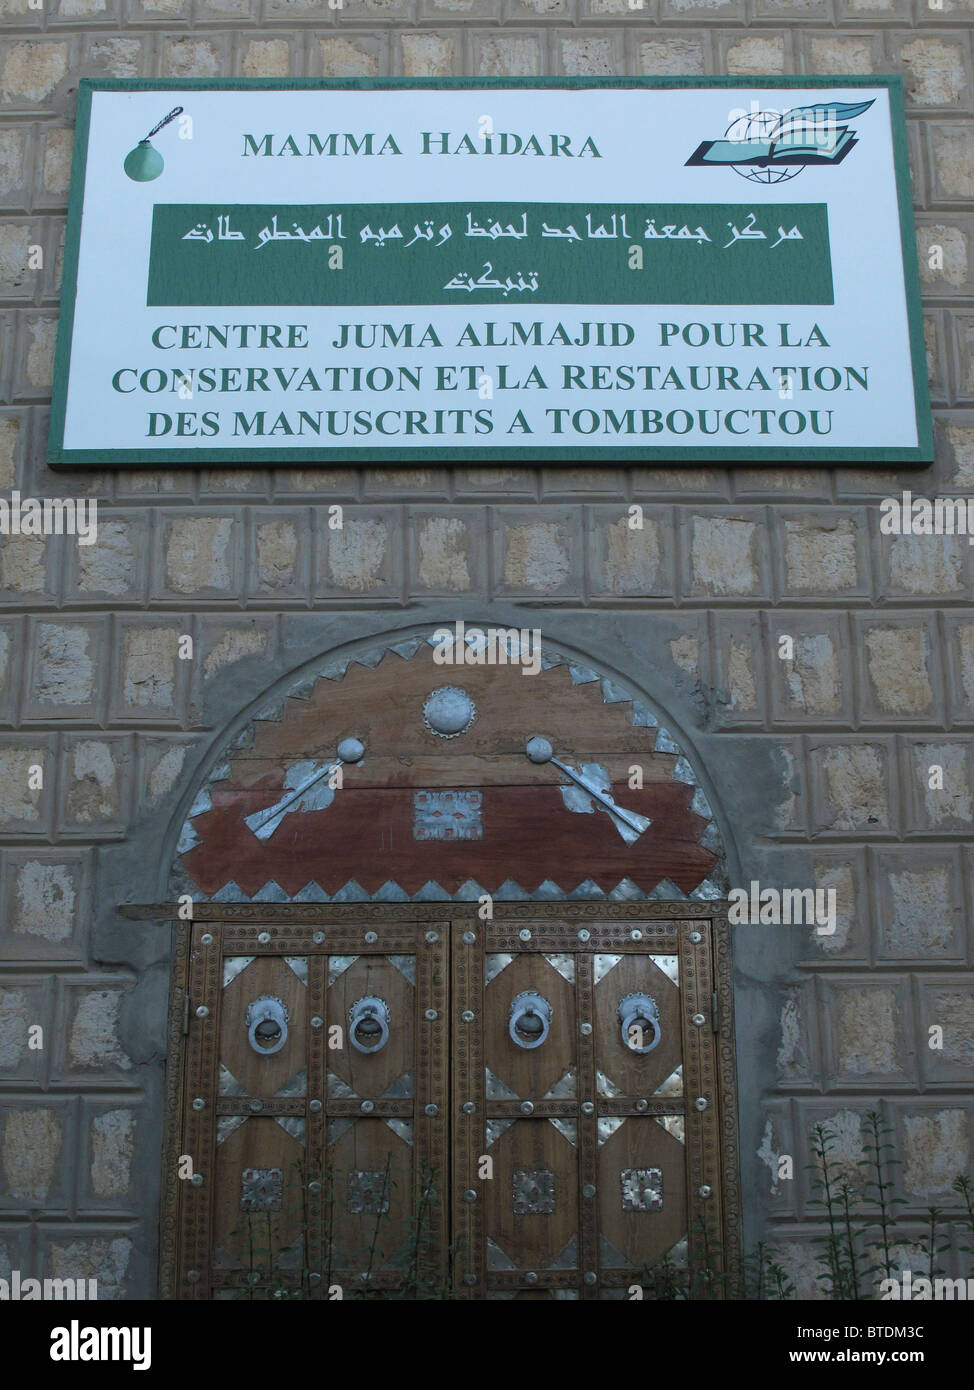 Ornate wooden door and signboard at the Timbuktu centre for the conservation and restoration of ancient manuscripts Stock Photo